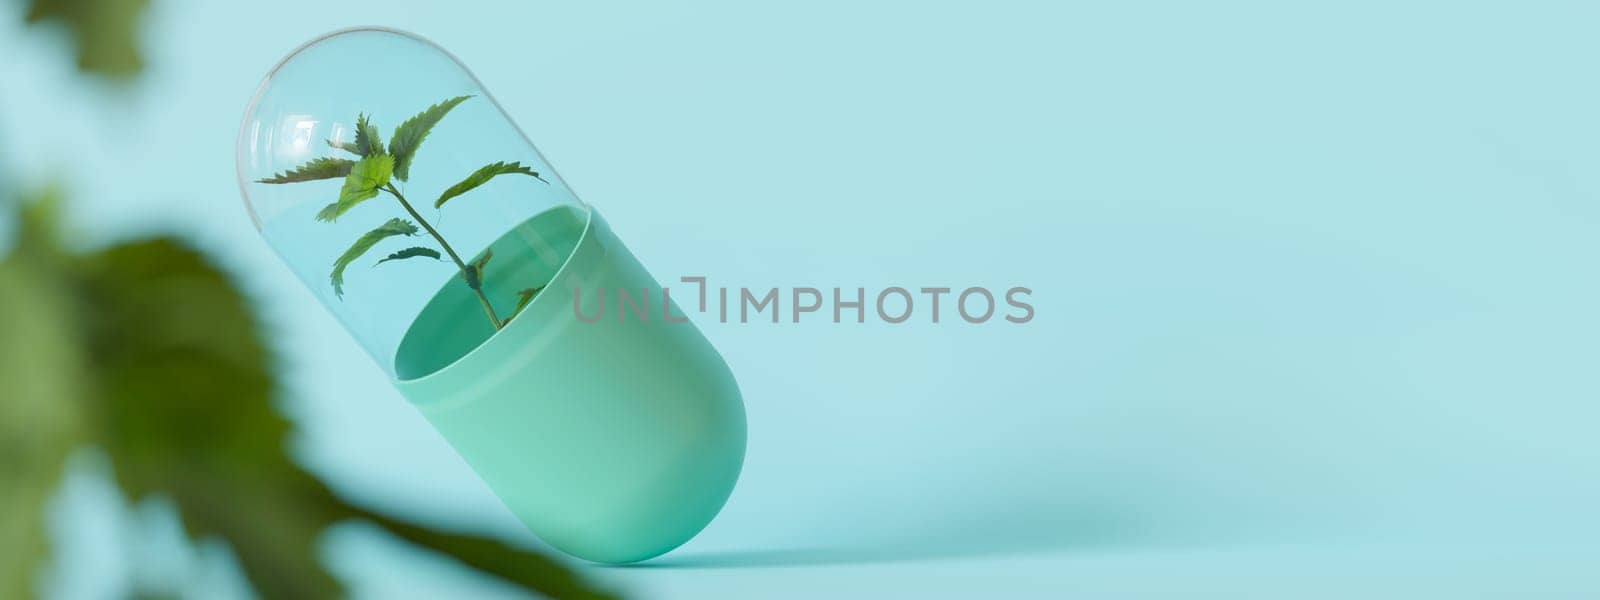 Elegant homeopathy capsule with a plant inside, conveying natural and alternative medicine concepts, ideal for wellness and healthcare imagery. Homeopathic therapy. Copy space for text. Banner. 3D